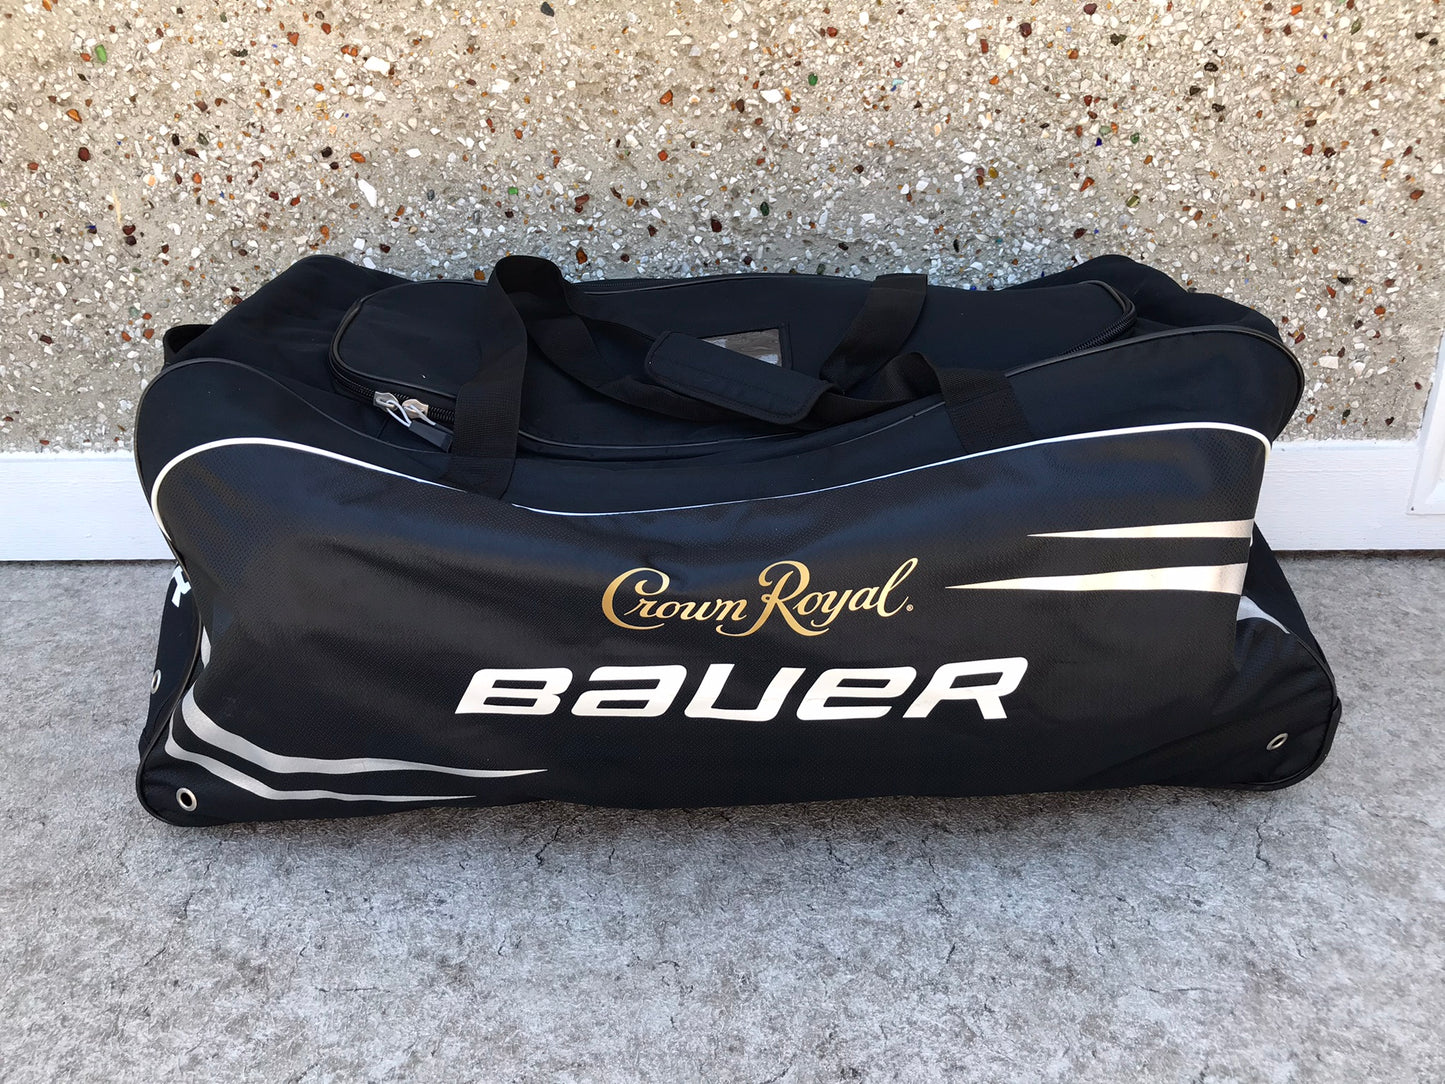 Hockey Bag Very RARE Collectable Crown Royal Whisky Promotional Bag on Wheels